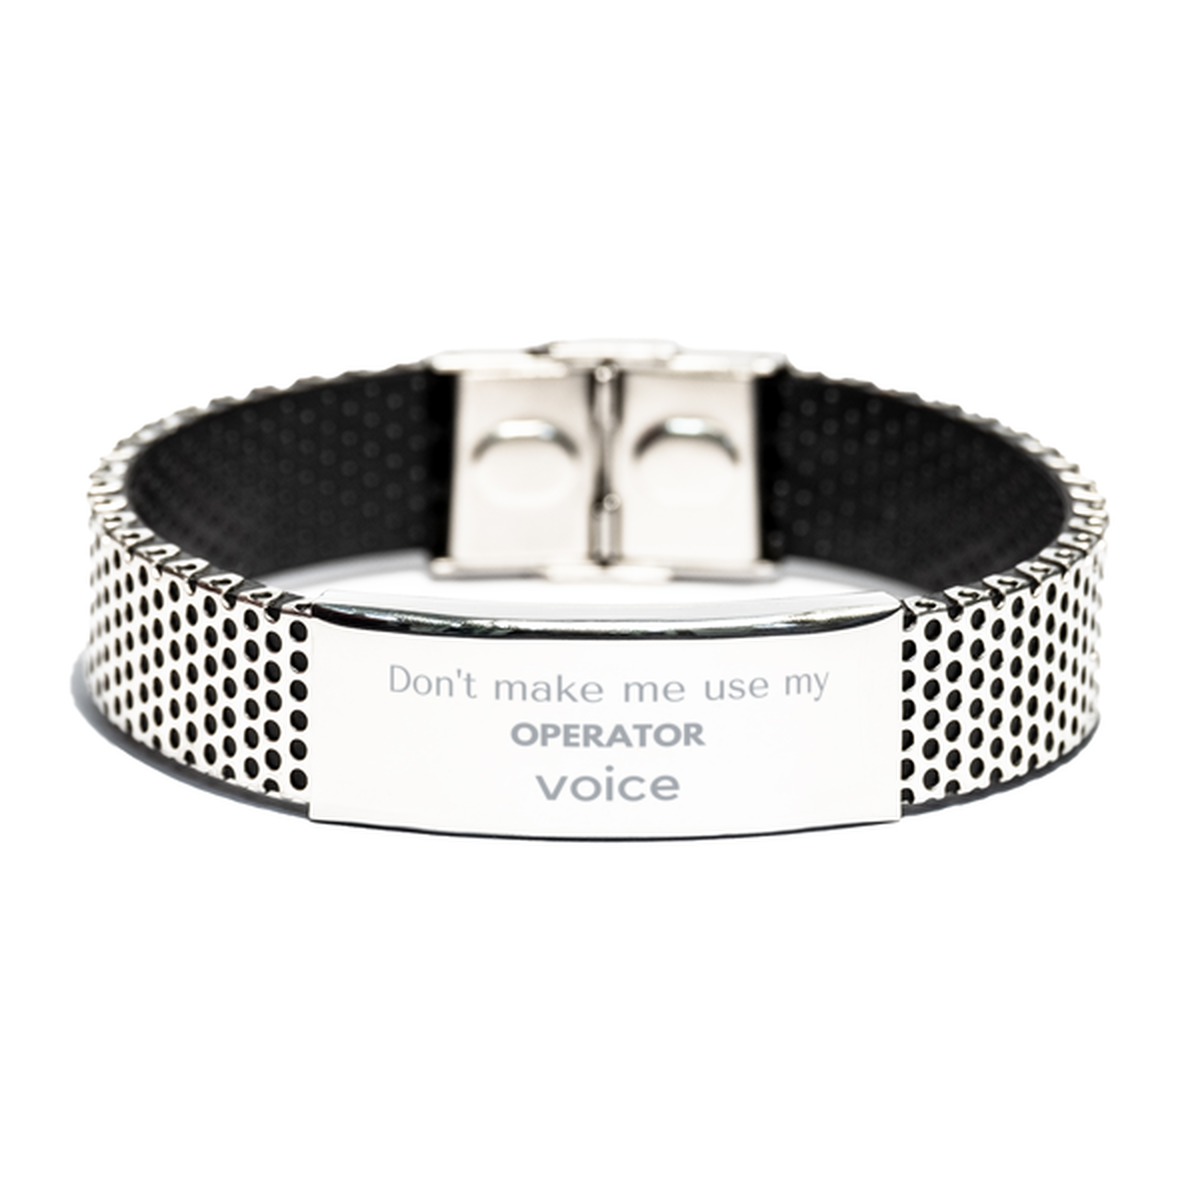 Don't make me use my Operator voice, Sarcasm Operator Gifts, Christmas Operator Stainless Steel Bracelet Birthday Unique Gifts For Operator Coworkers, Men, Women, Colleague, Friends